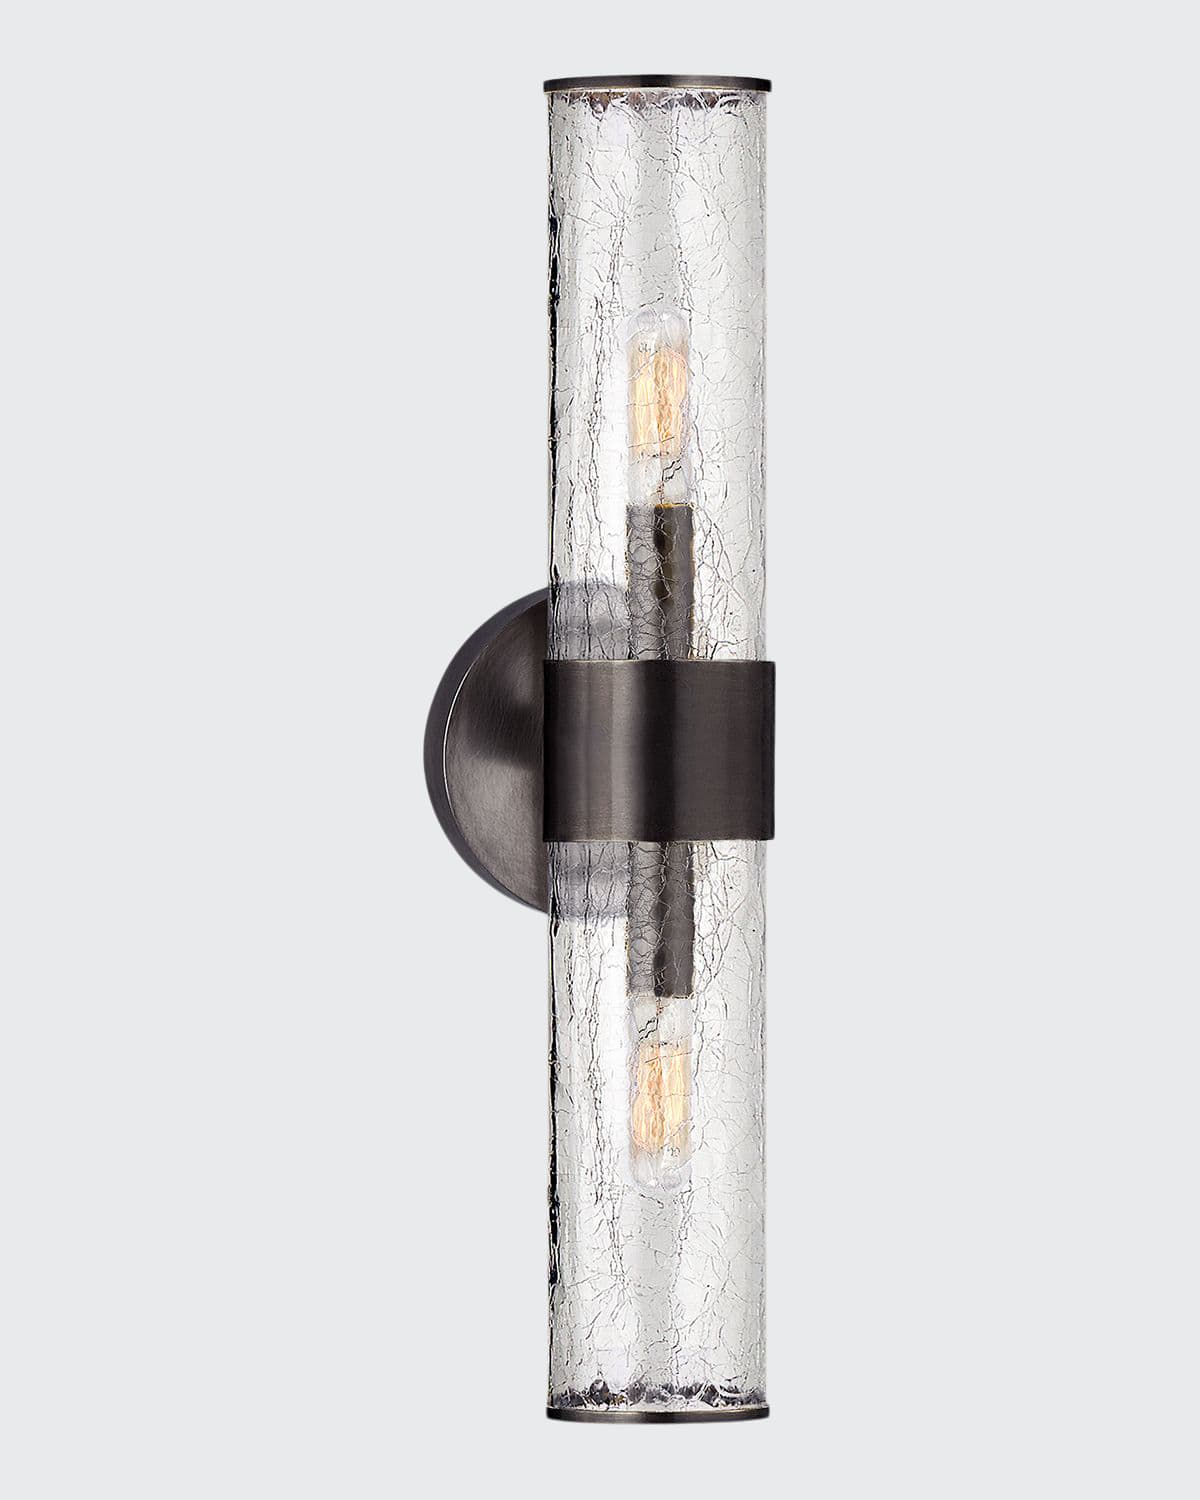 Kelly Wearstler For Visual Comfort Signature Liaison Medium Sconce In Polished Nickel